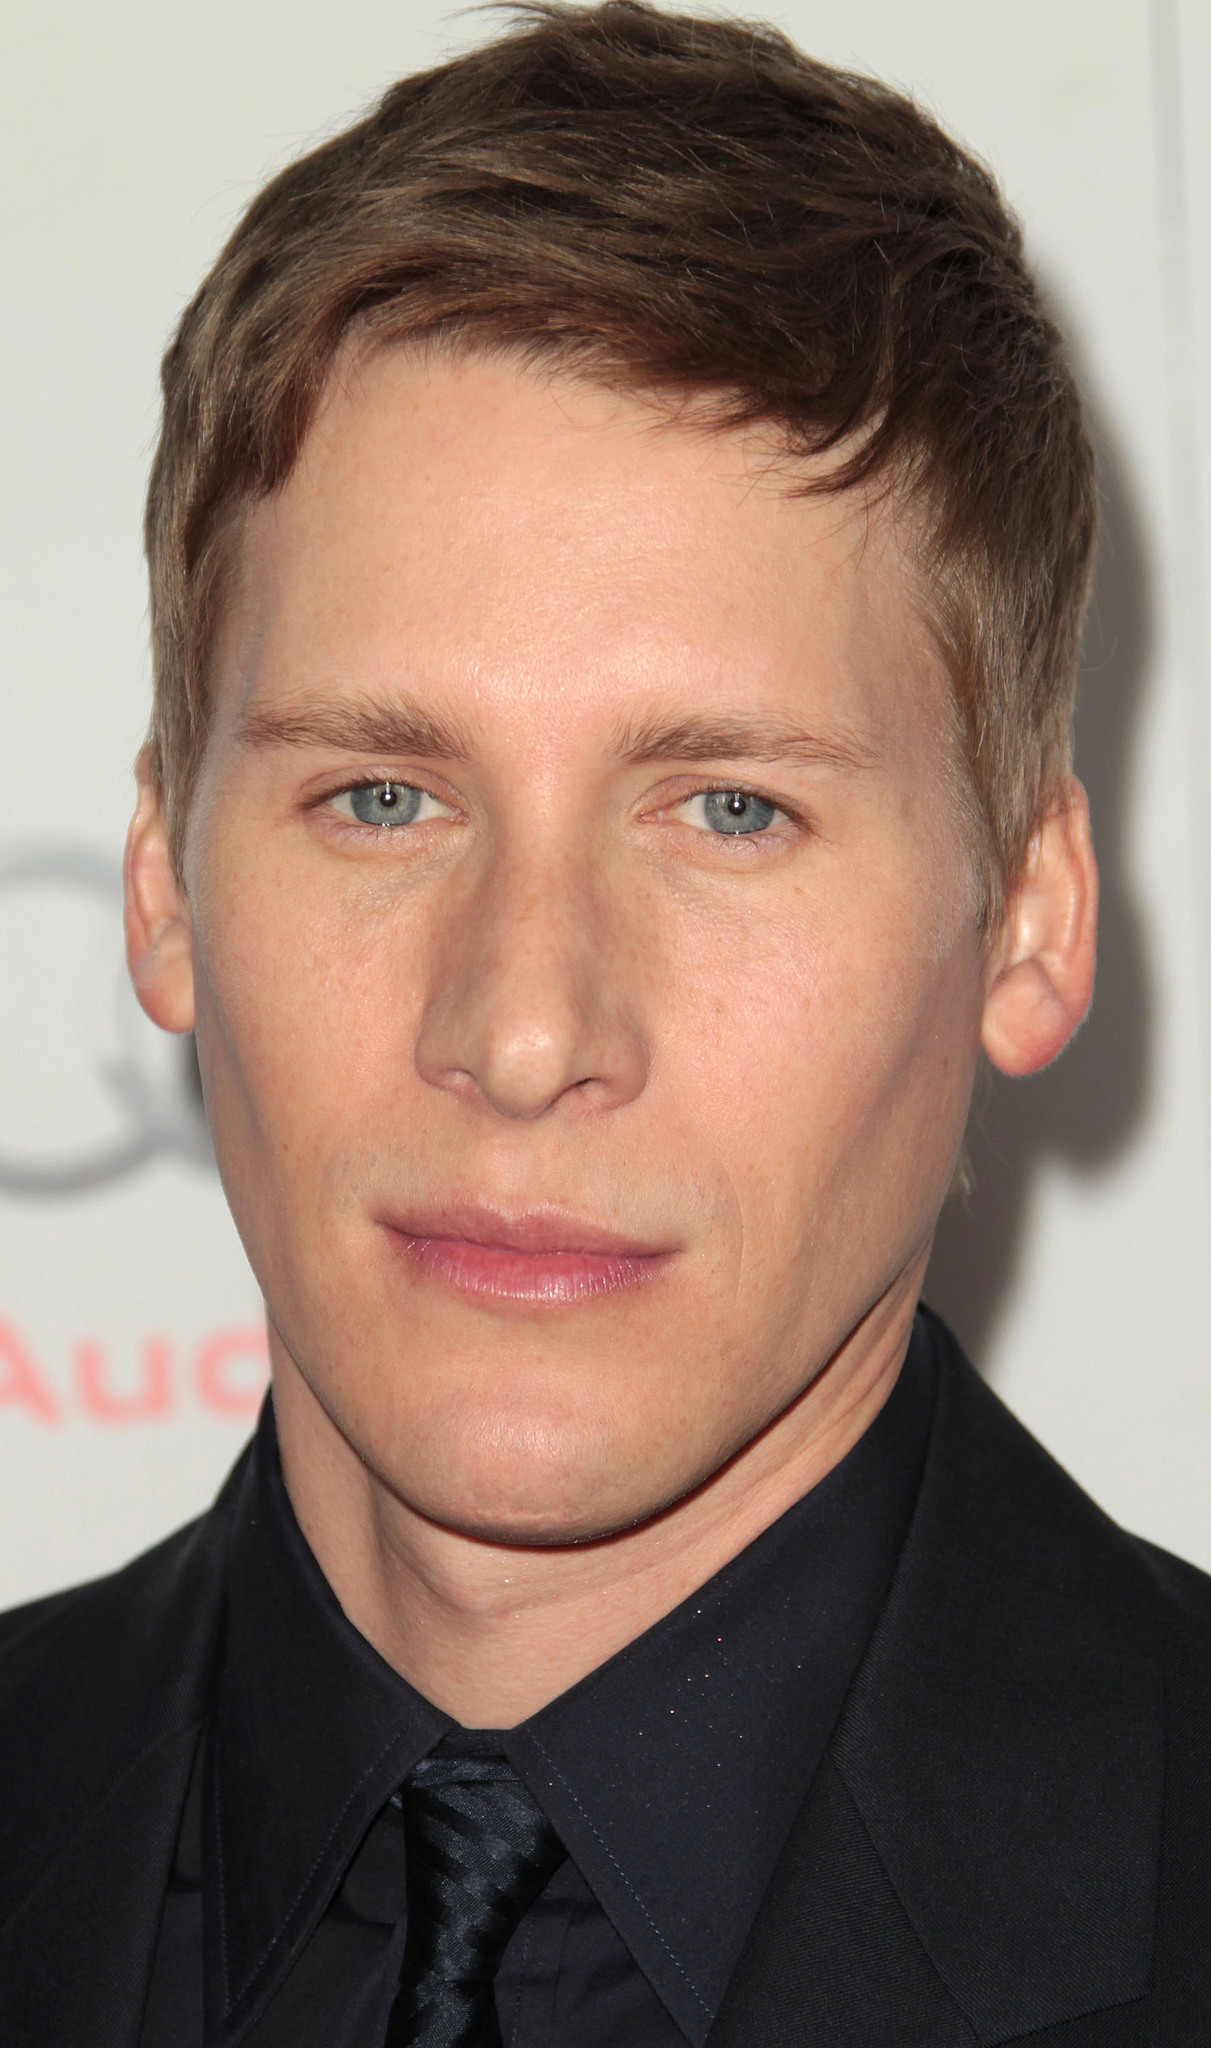 brittany crutchfield recommends dustin lance black scandal pic